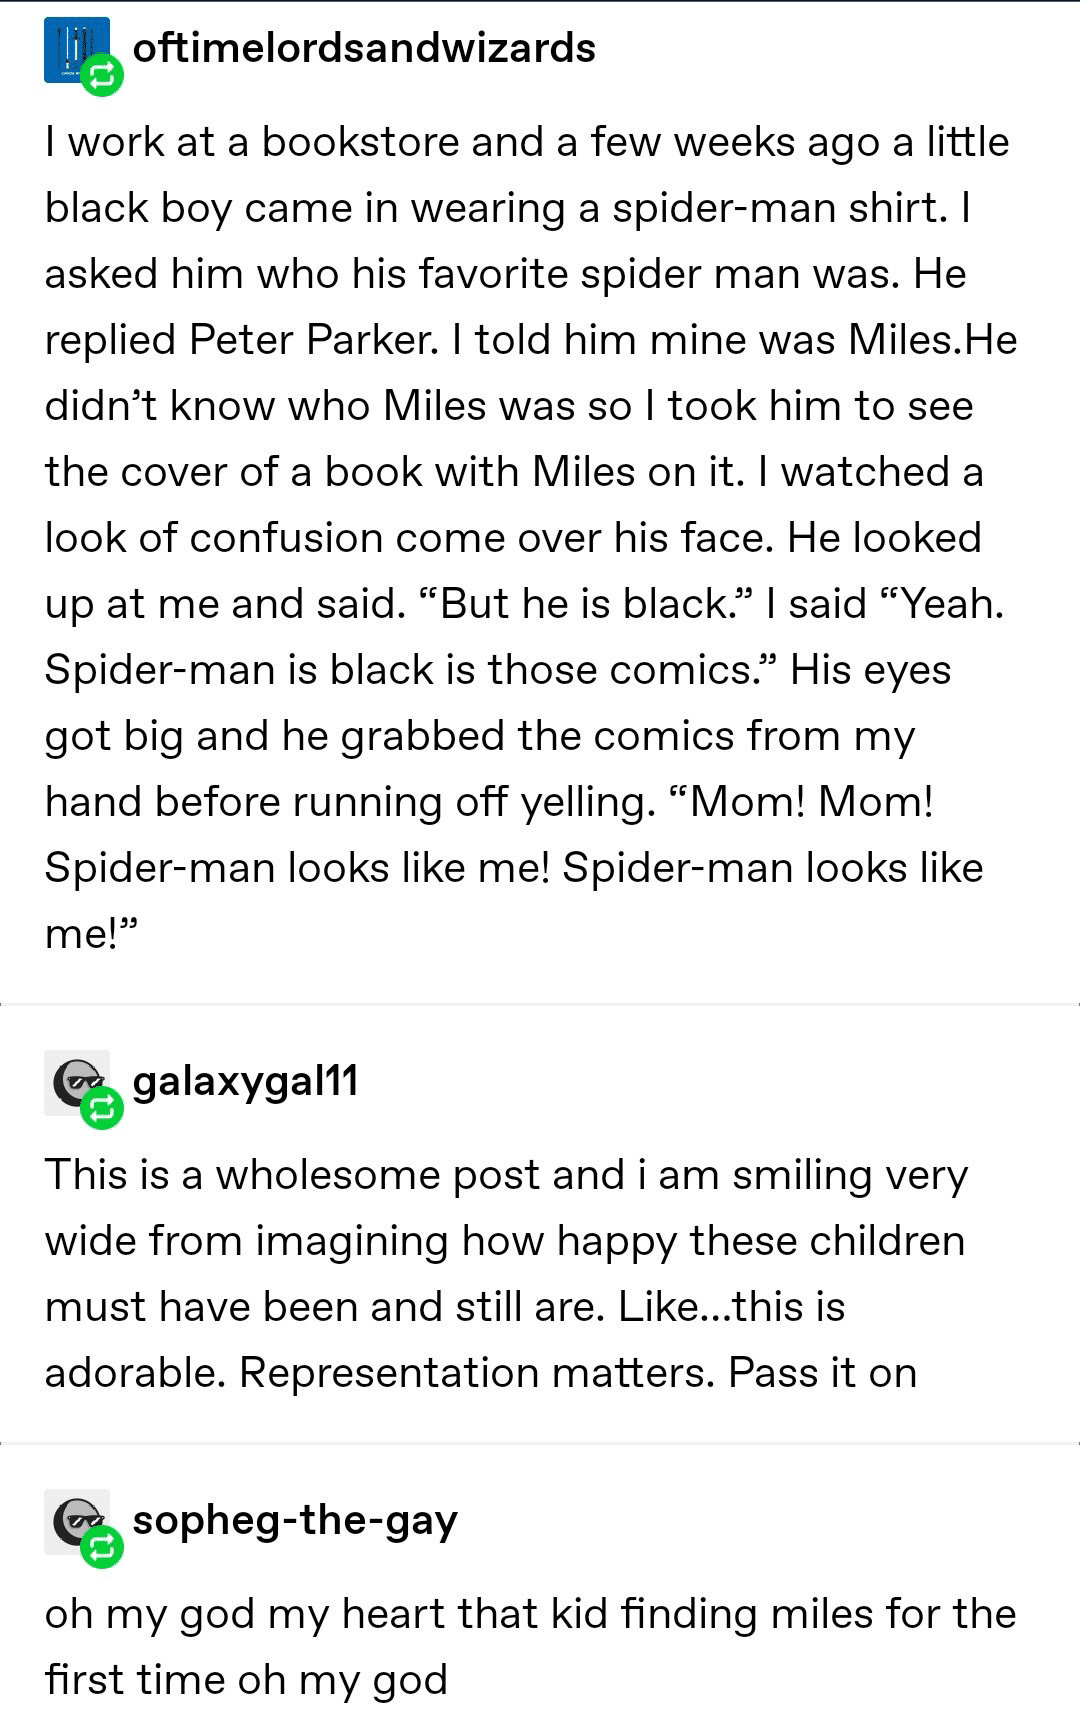 cute wholesome-memes cute text: oftimelordsandwizards I work at a bookstore and a few weeks ago a little black boy came in wearing a spider-man shirt. I asked him who his favorite spider man was. He replied Peter Parker. I told him mine was Miles.He didn't know who Miles was so I took him to see the cover of a book with Miles on it. I watched a look of confusion come over his face. He looked up at me and said. 